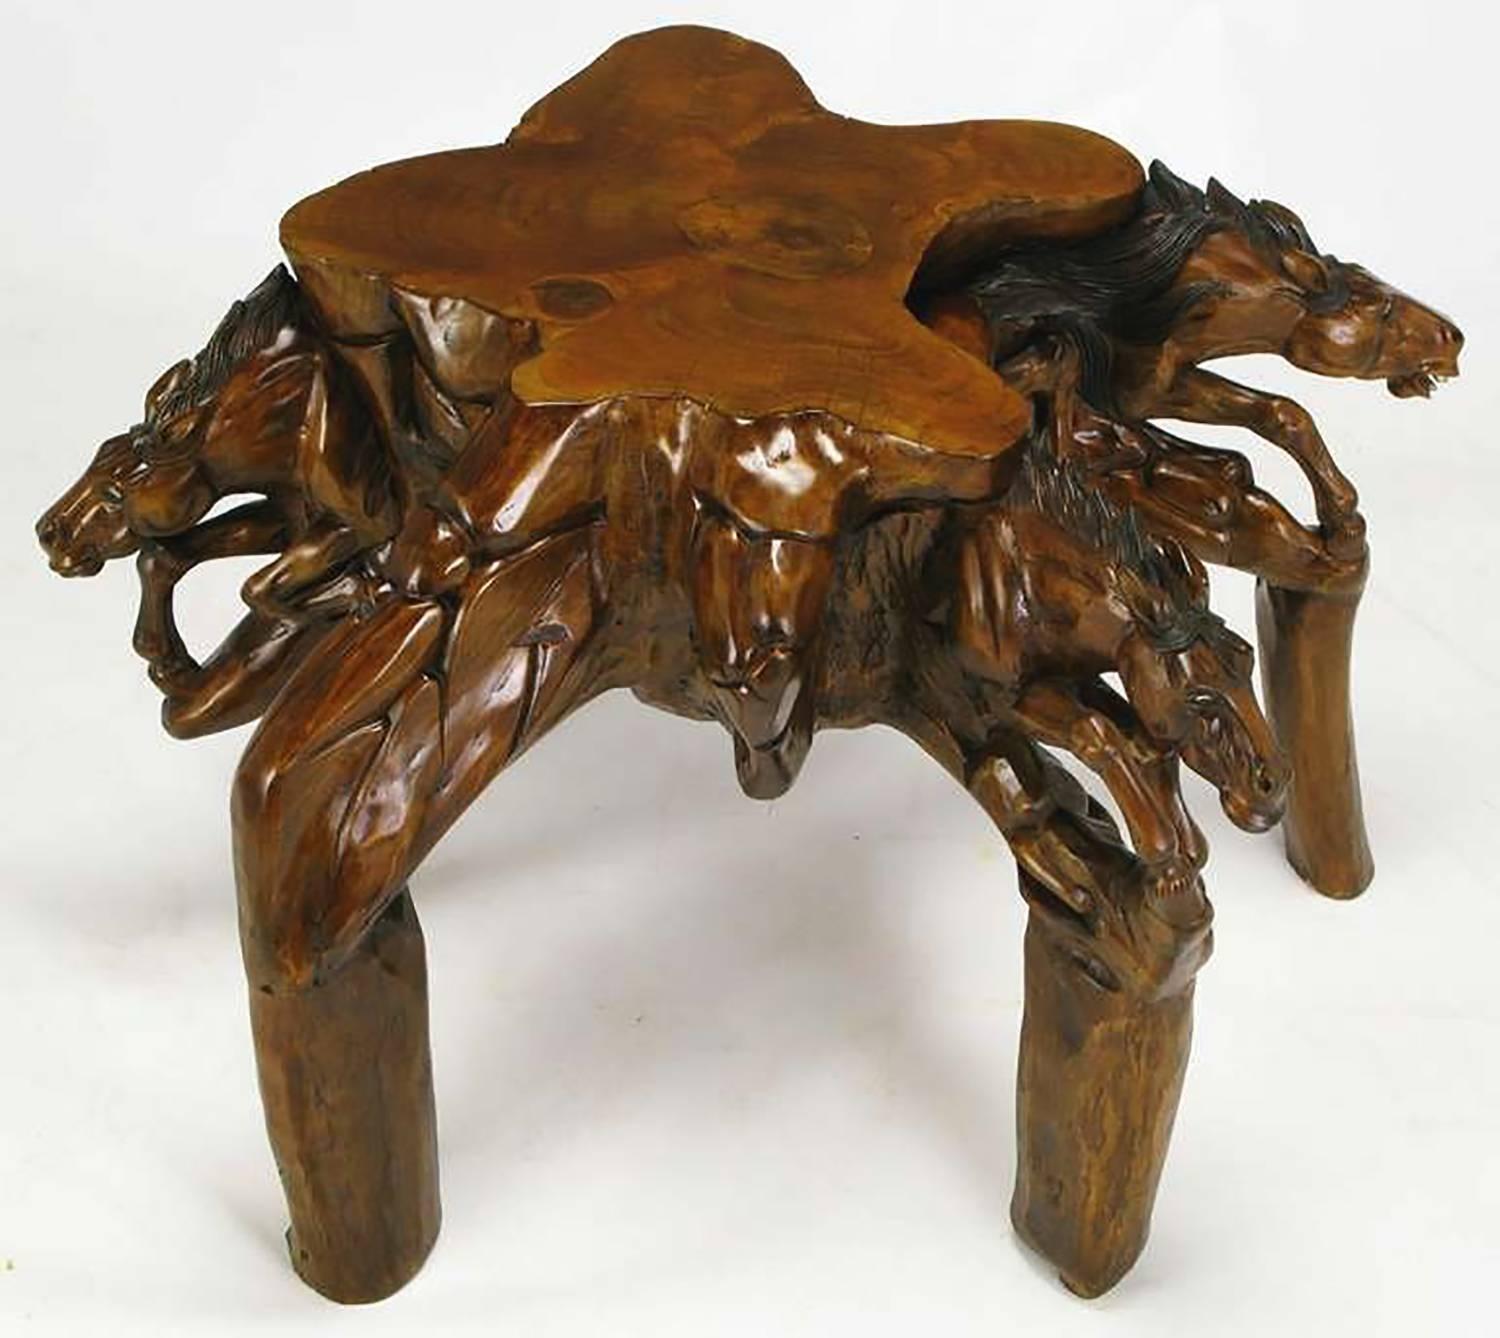 Incredible Equine Carved Wood Coffee Table In Excellent Condition For Sale In Chicago, IL